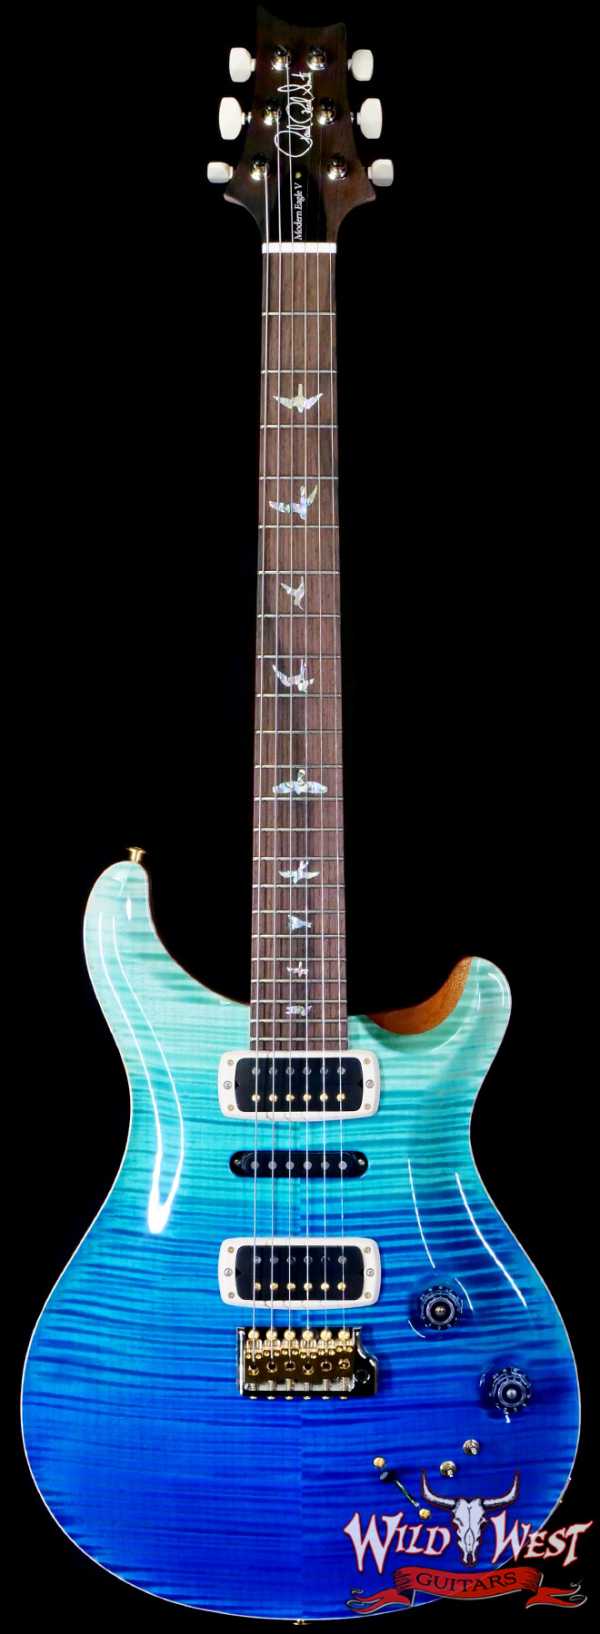 Paul Reed Smith PRS Wood Library 10 Top Modern Eagle V ME5 Flame Maple Neck Brazilian Rosewood Fingerboard Blue Fade 7.75 LBS (US Only / No International Shipping)